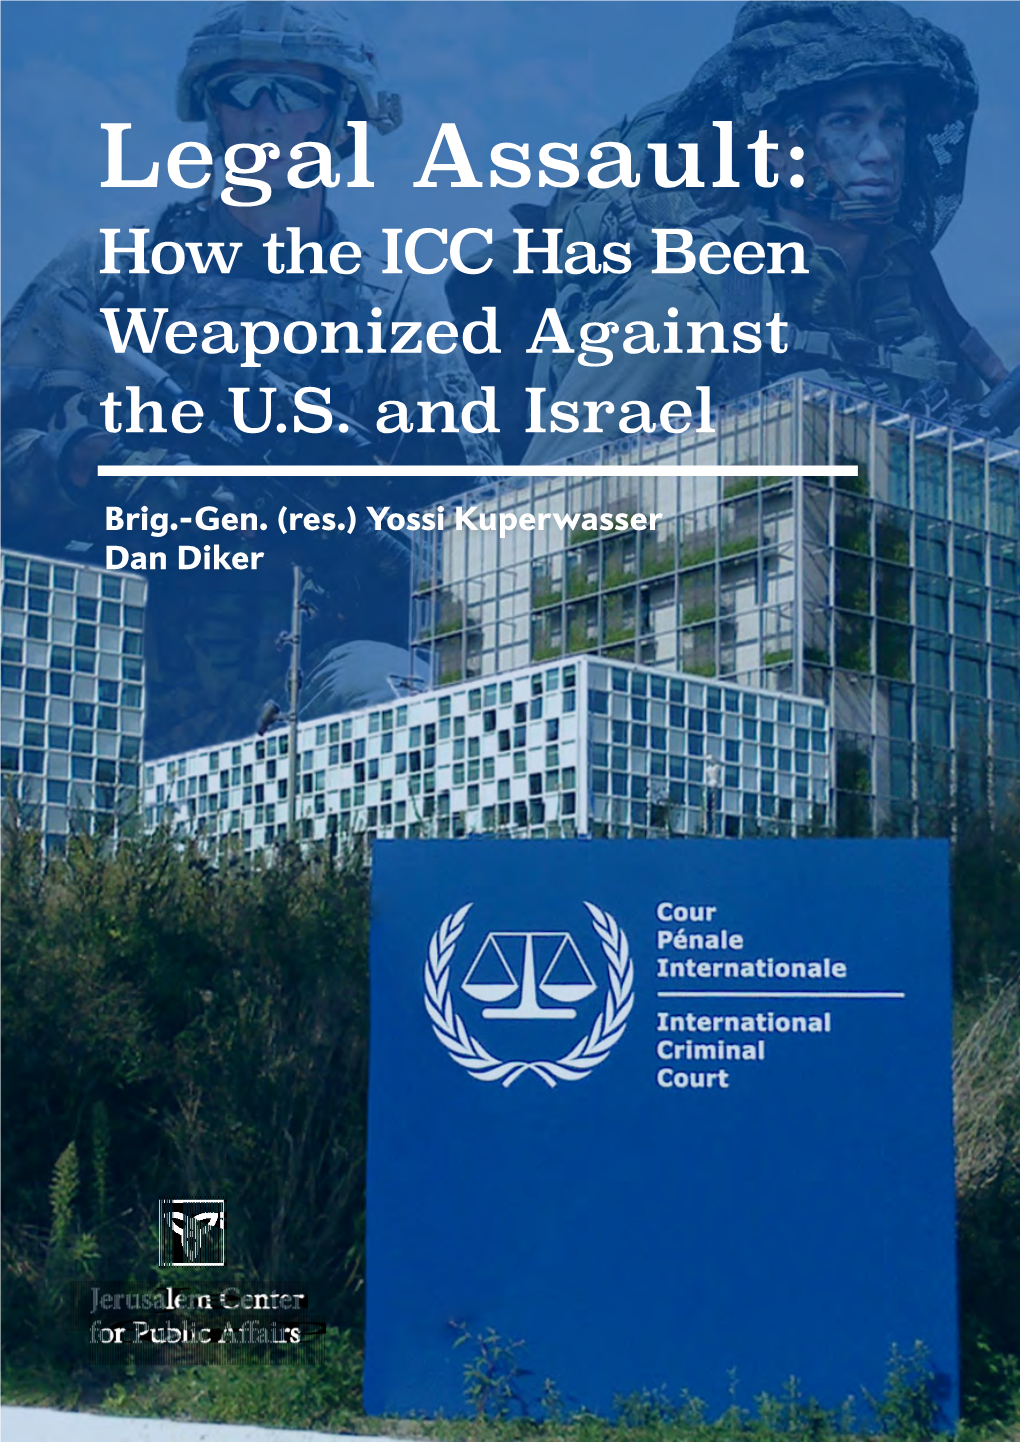 Legal Assault: How the ICC Has Been Weaponized Against the U.S